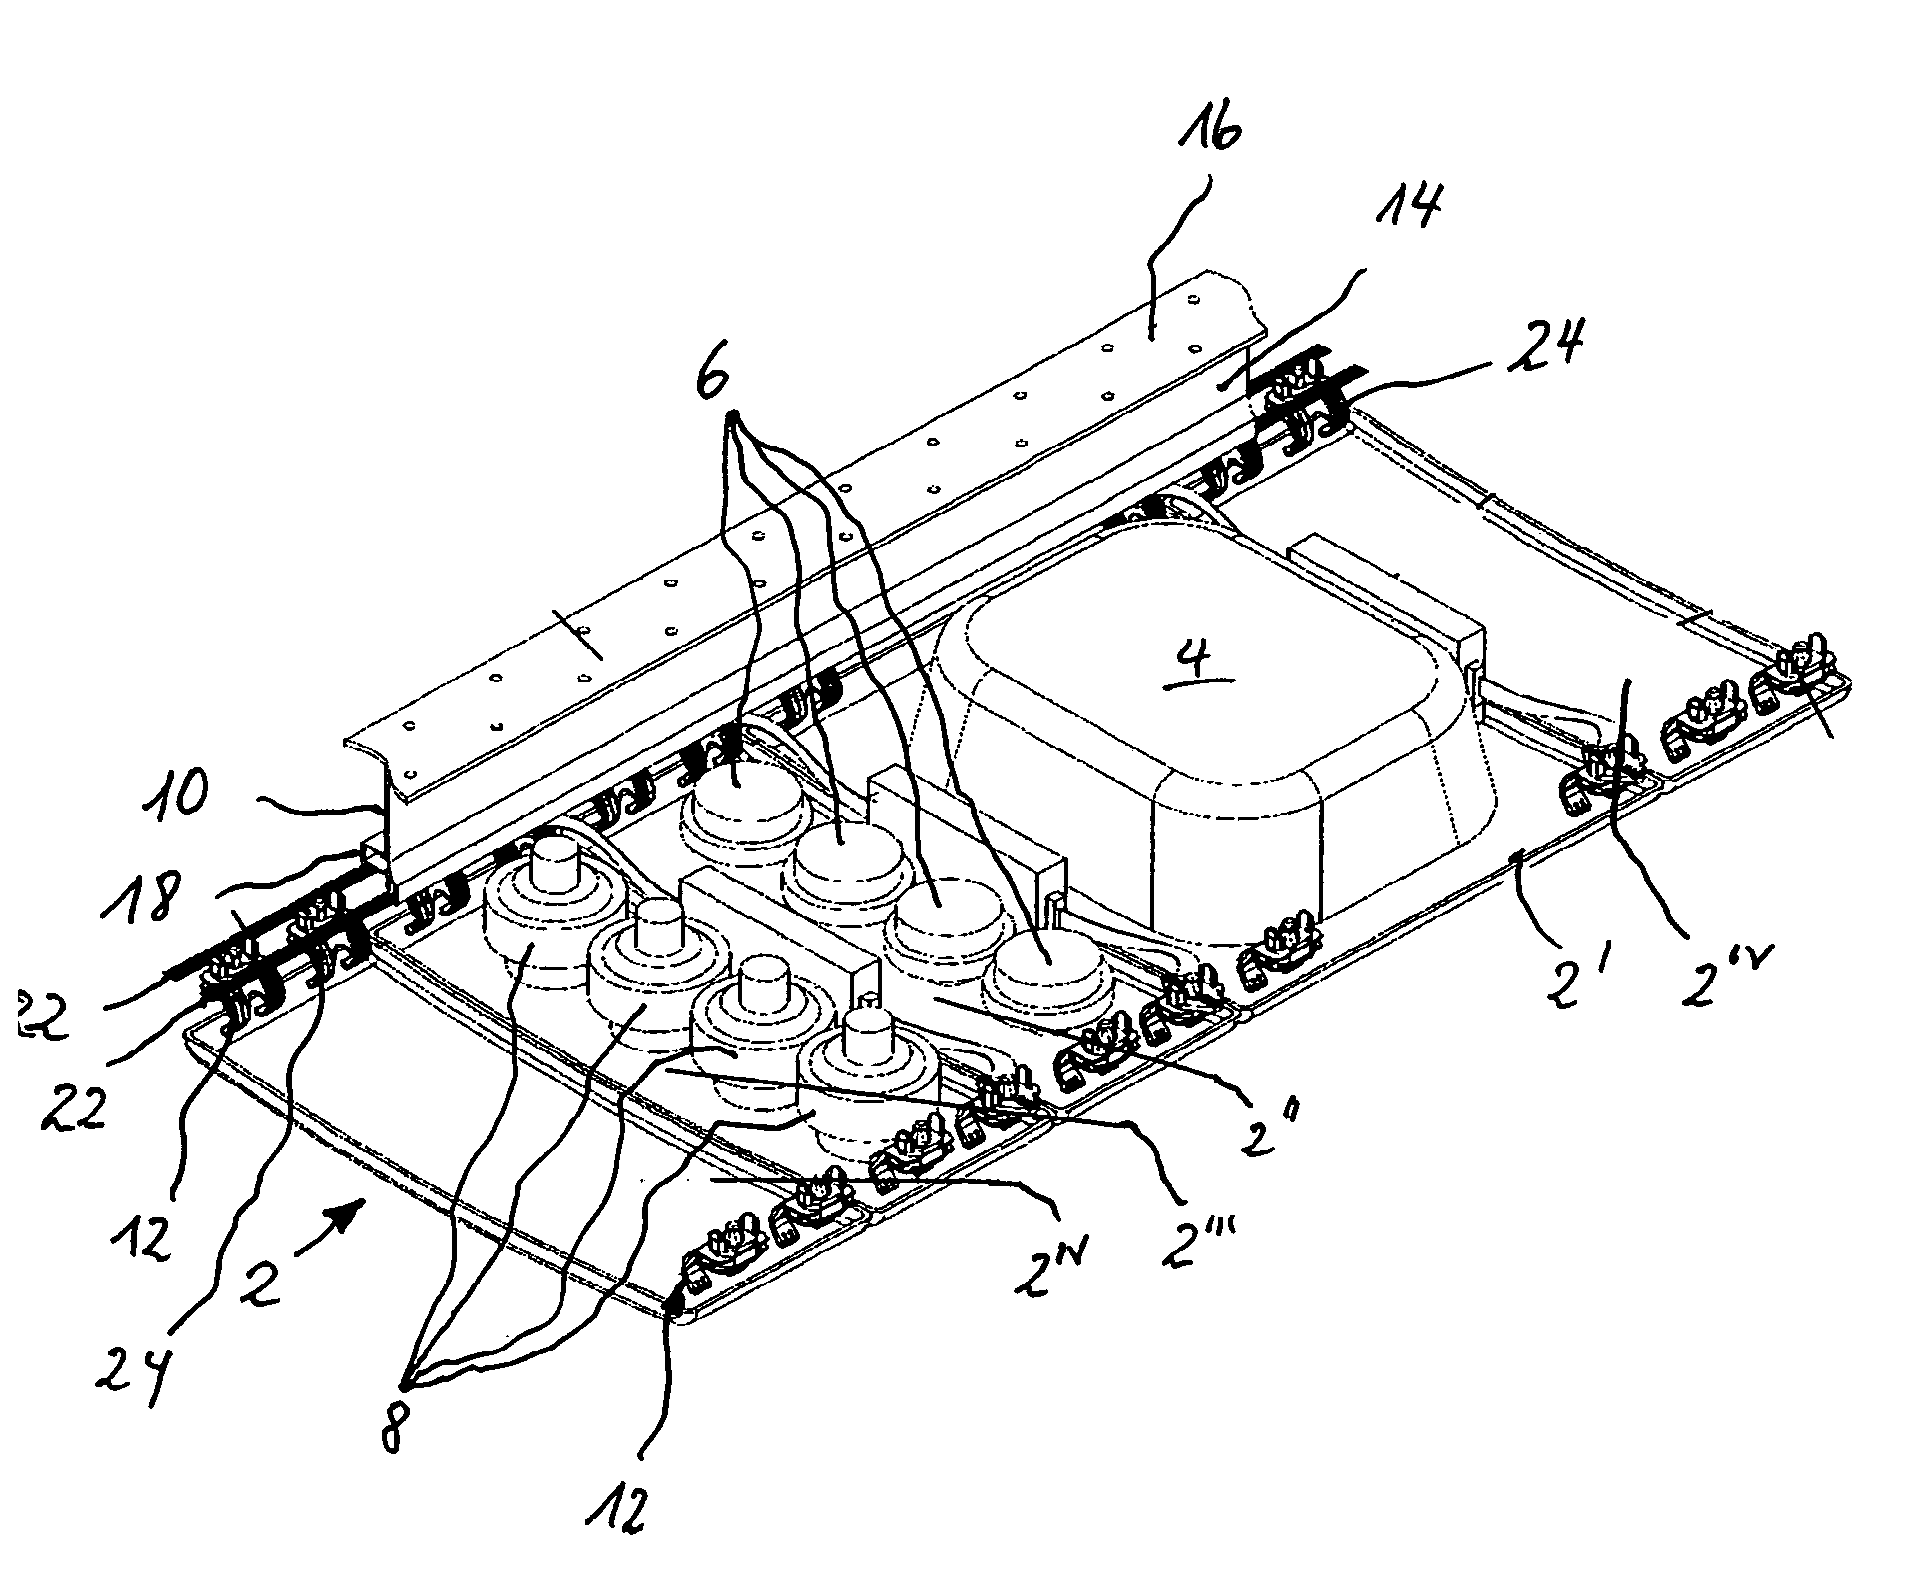 Arrangement of at least one personal service unit in a vehicle